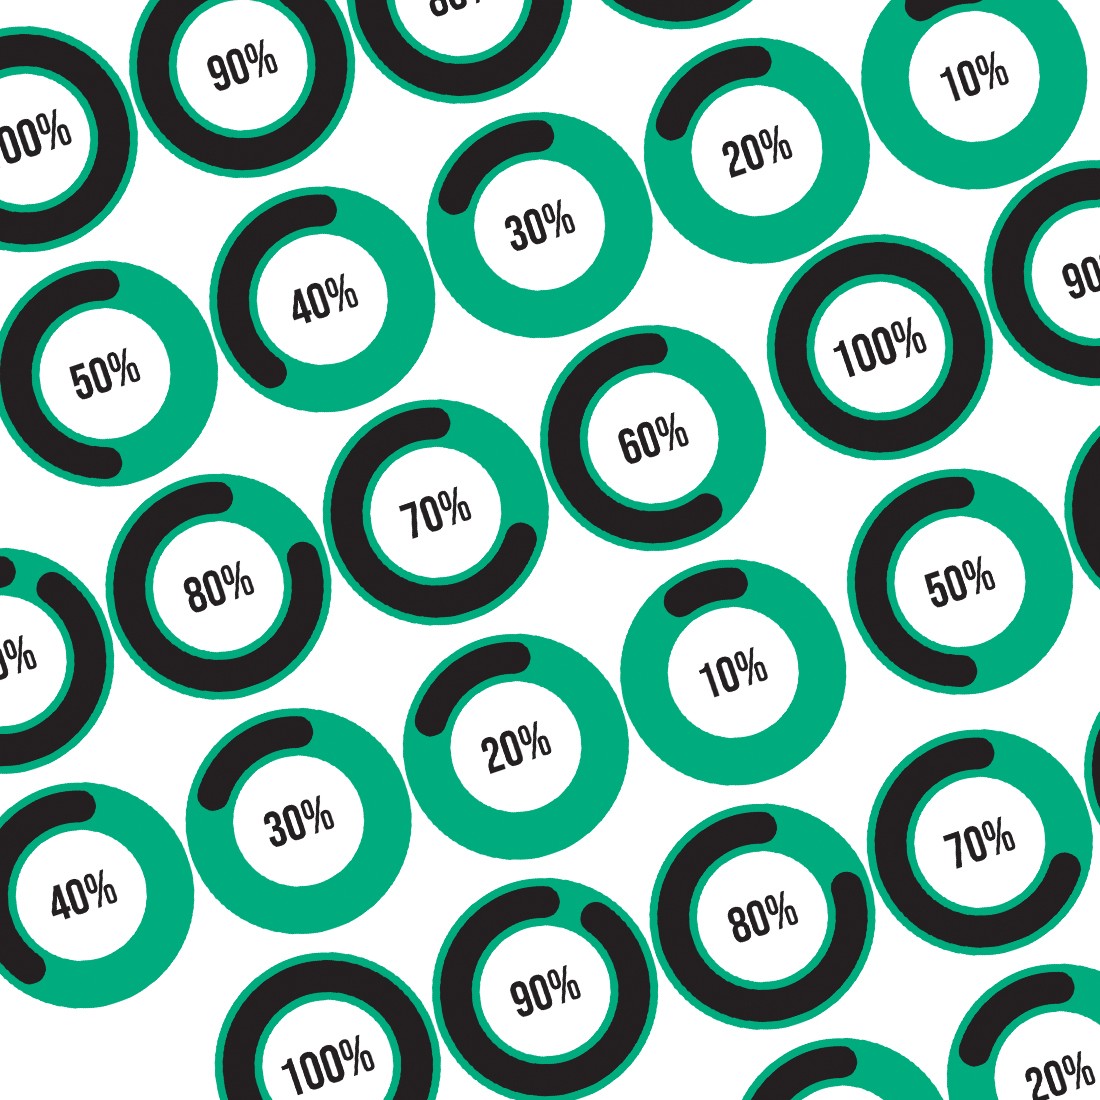 Infographic Circular Percentage Completion Button green.